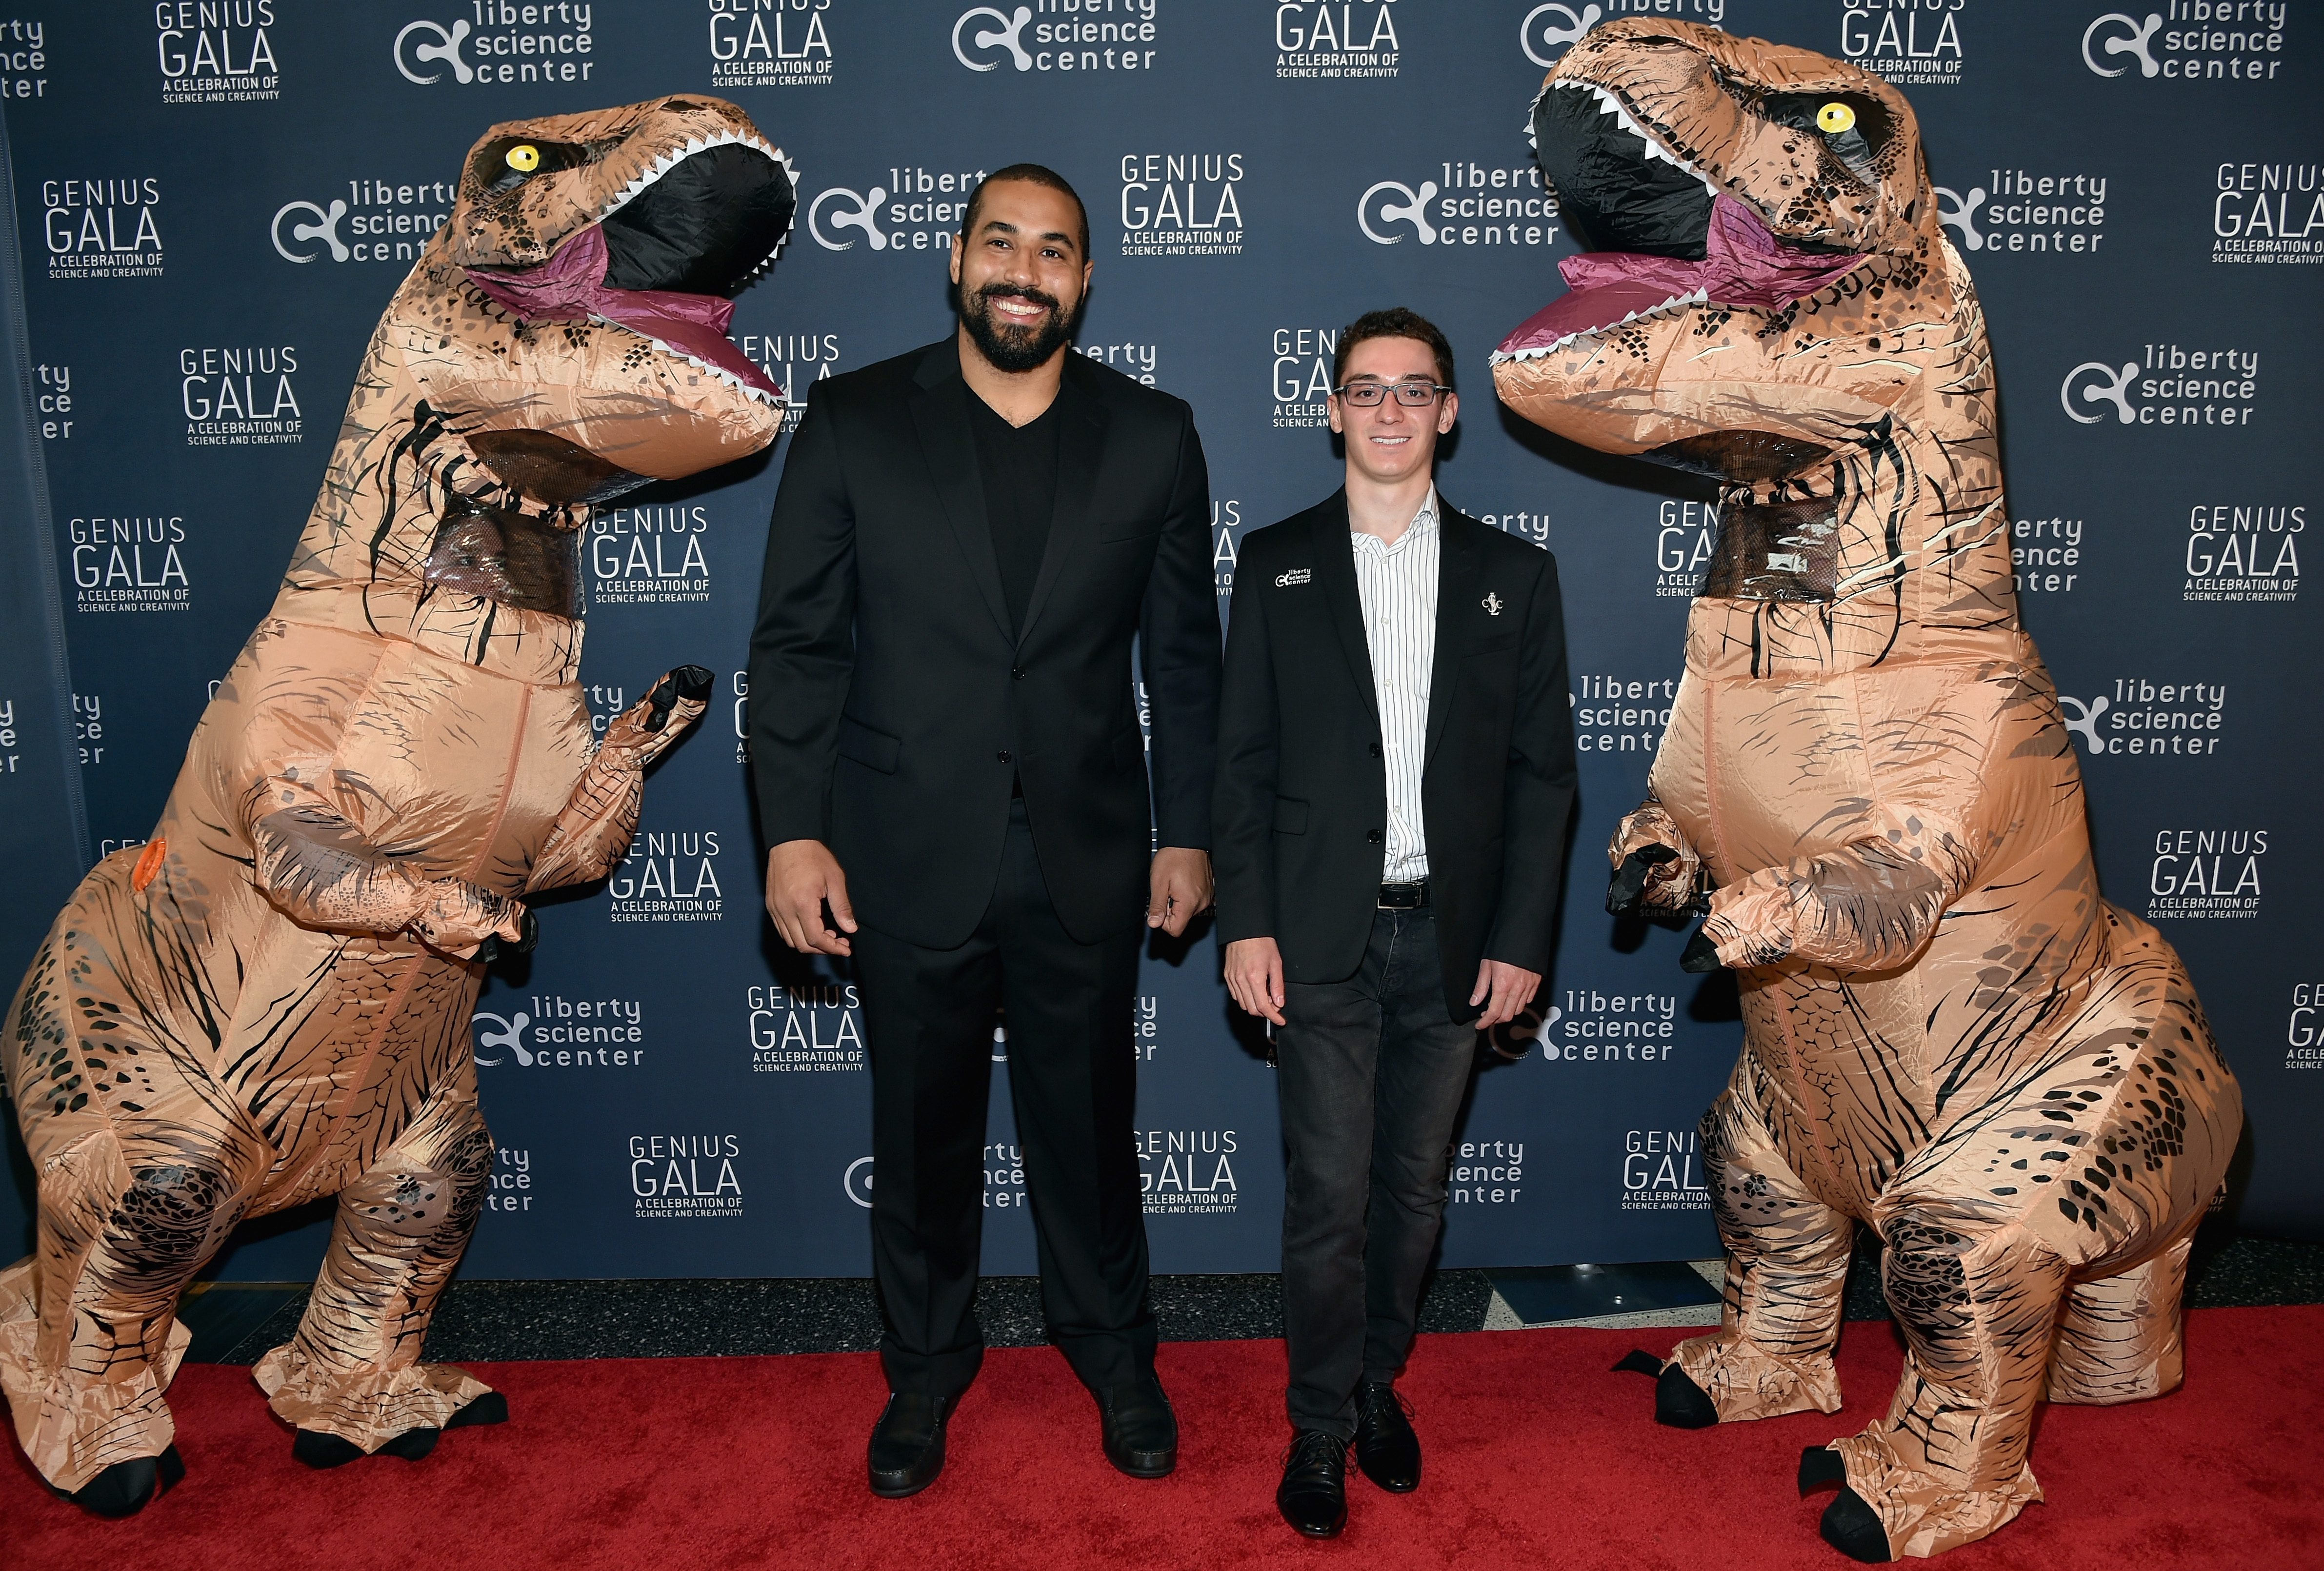 "JERSEY CITY, NJ - MAY 20: NFL Raven and mathematician, John Urschel (L) and US National Chess Champion, Fabiano Caruana, attend the Liberty Science Center's Genius Gala 5.0 on May 20, 2016 in Jersey City, New Jersey. (Photo by Mike Coppola/Getty Images for Liberty Science Center)"